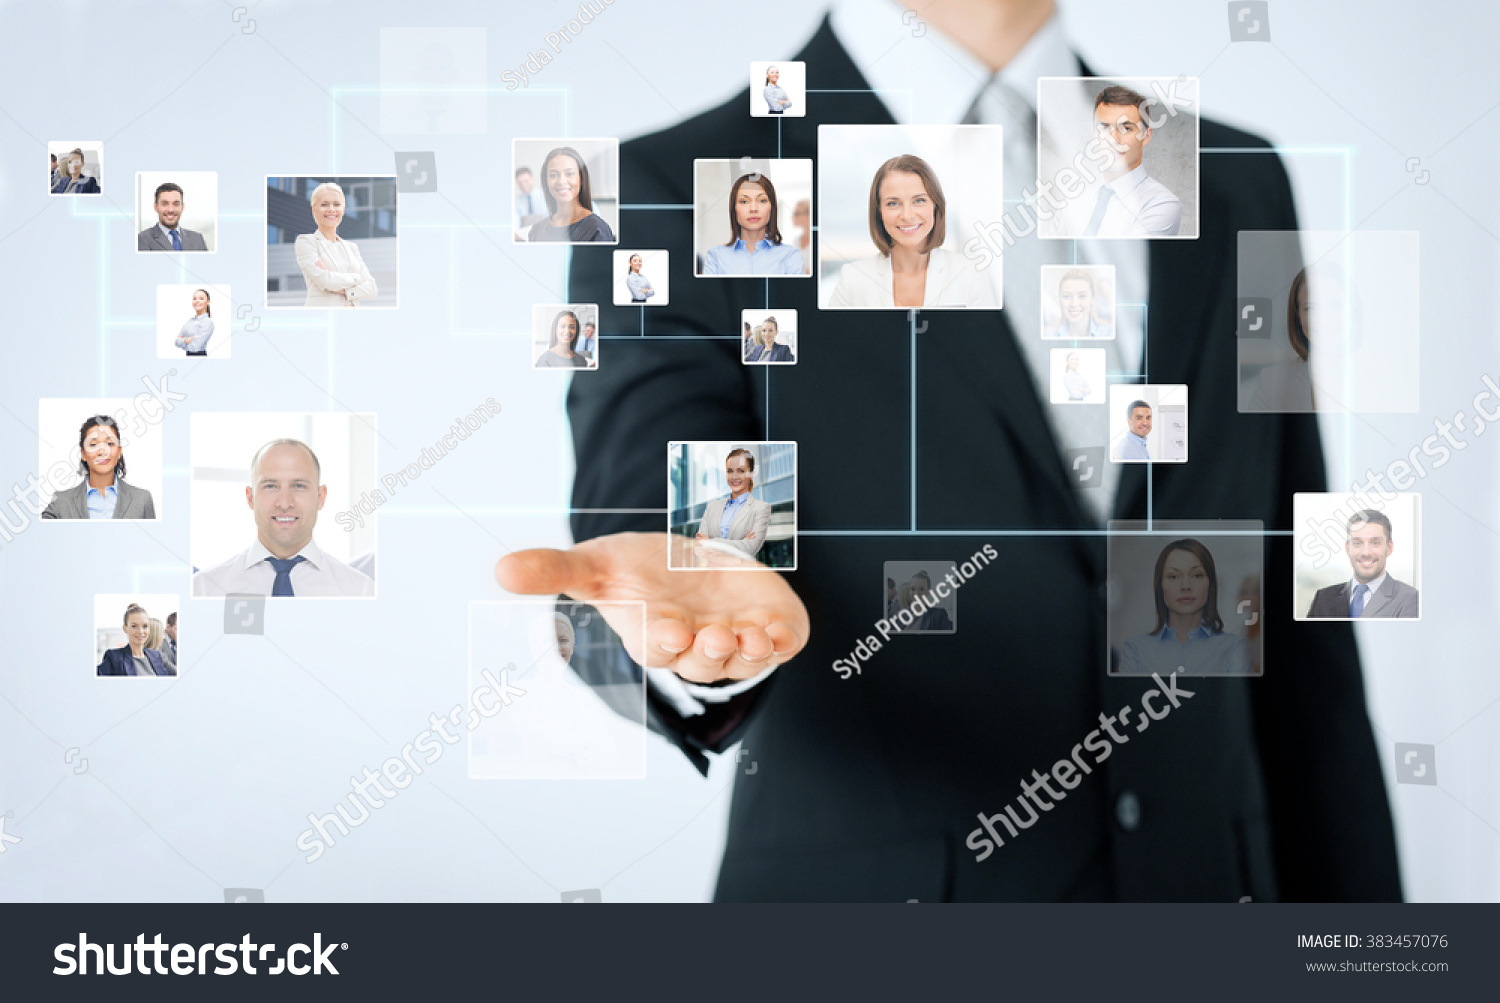 people, business, technology, headhunting and cooperation concept - close up of man hand showing business contacts icons projection #383457076